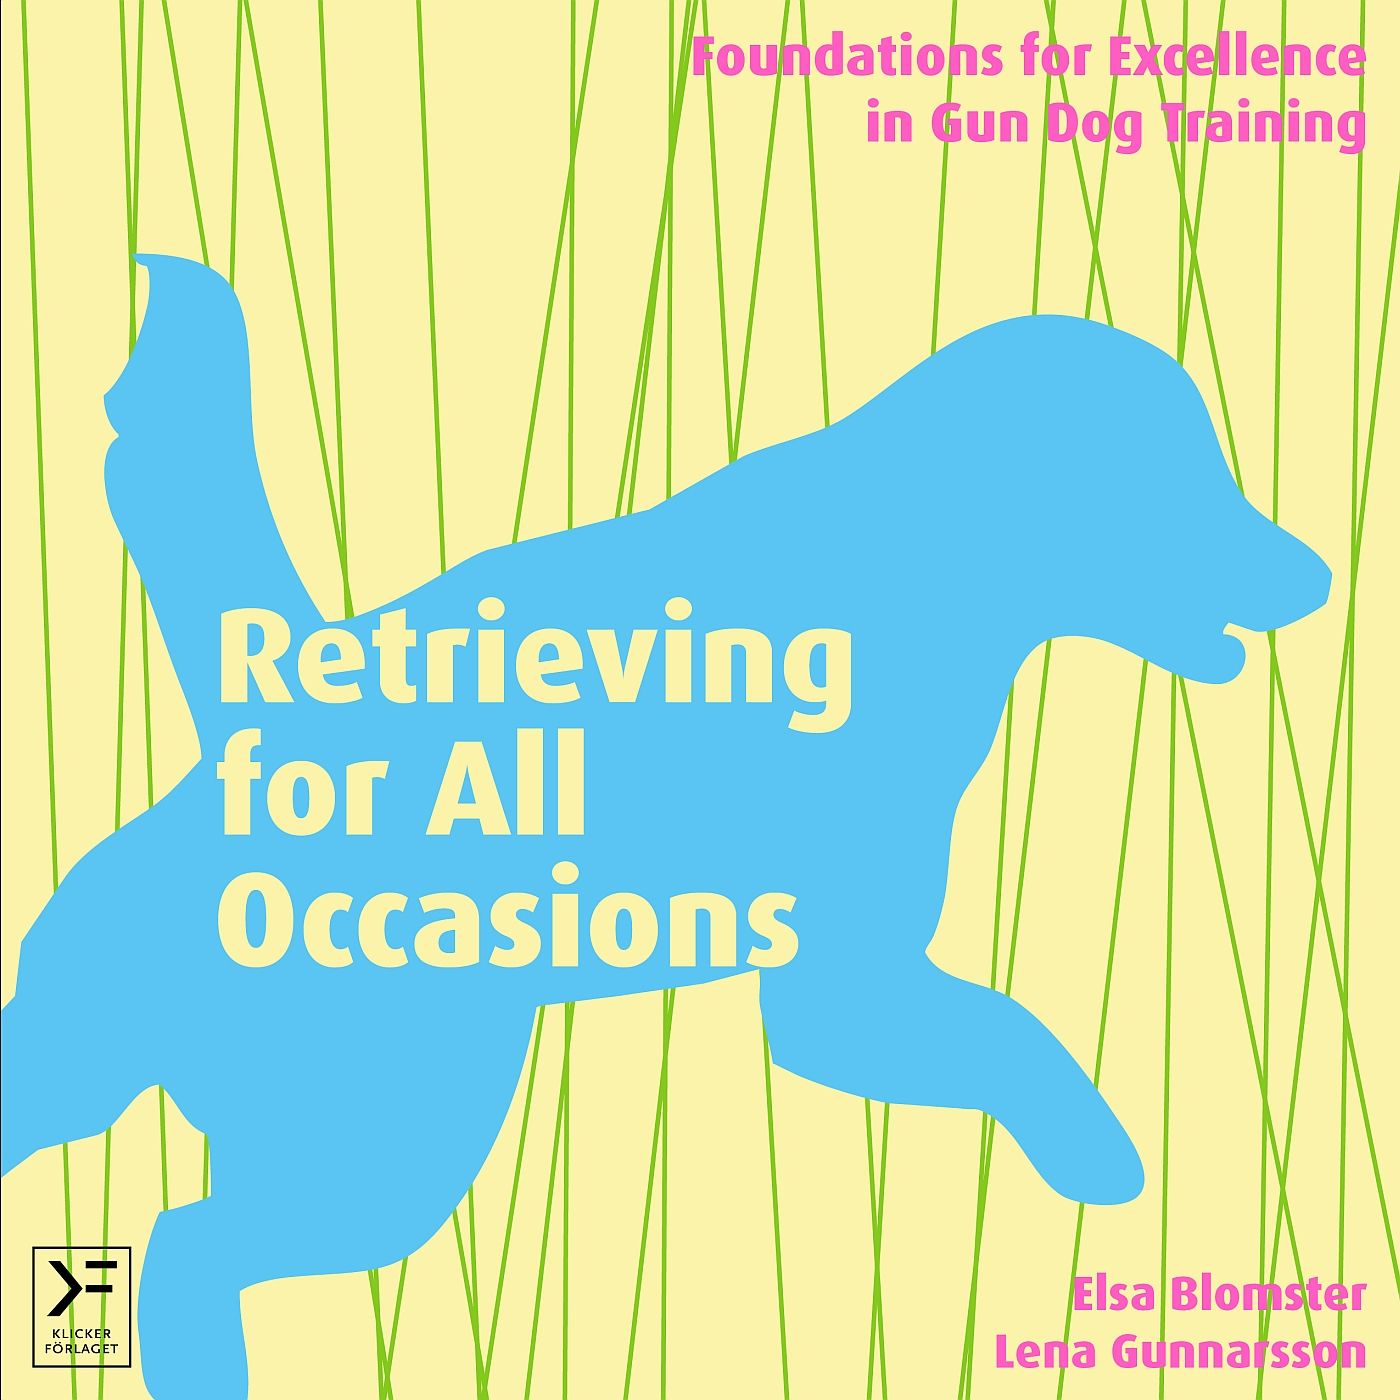 Retrieving for All Occasions, eBook by Elsa Blomster, Lena Gunnarsson